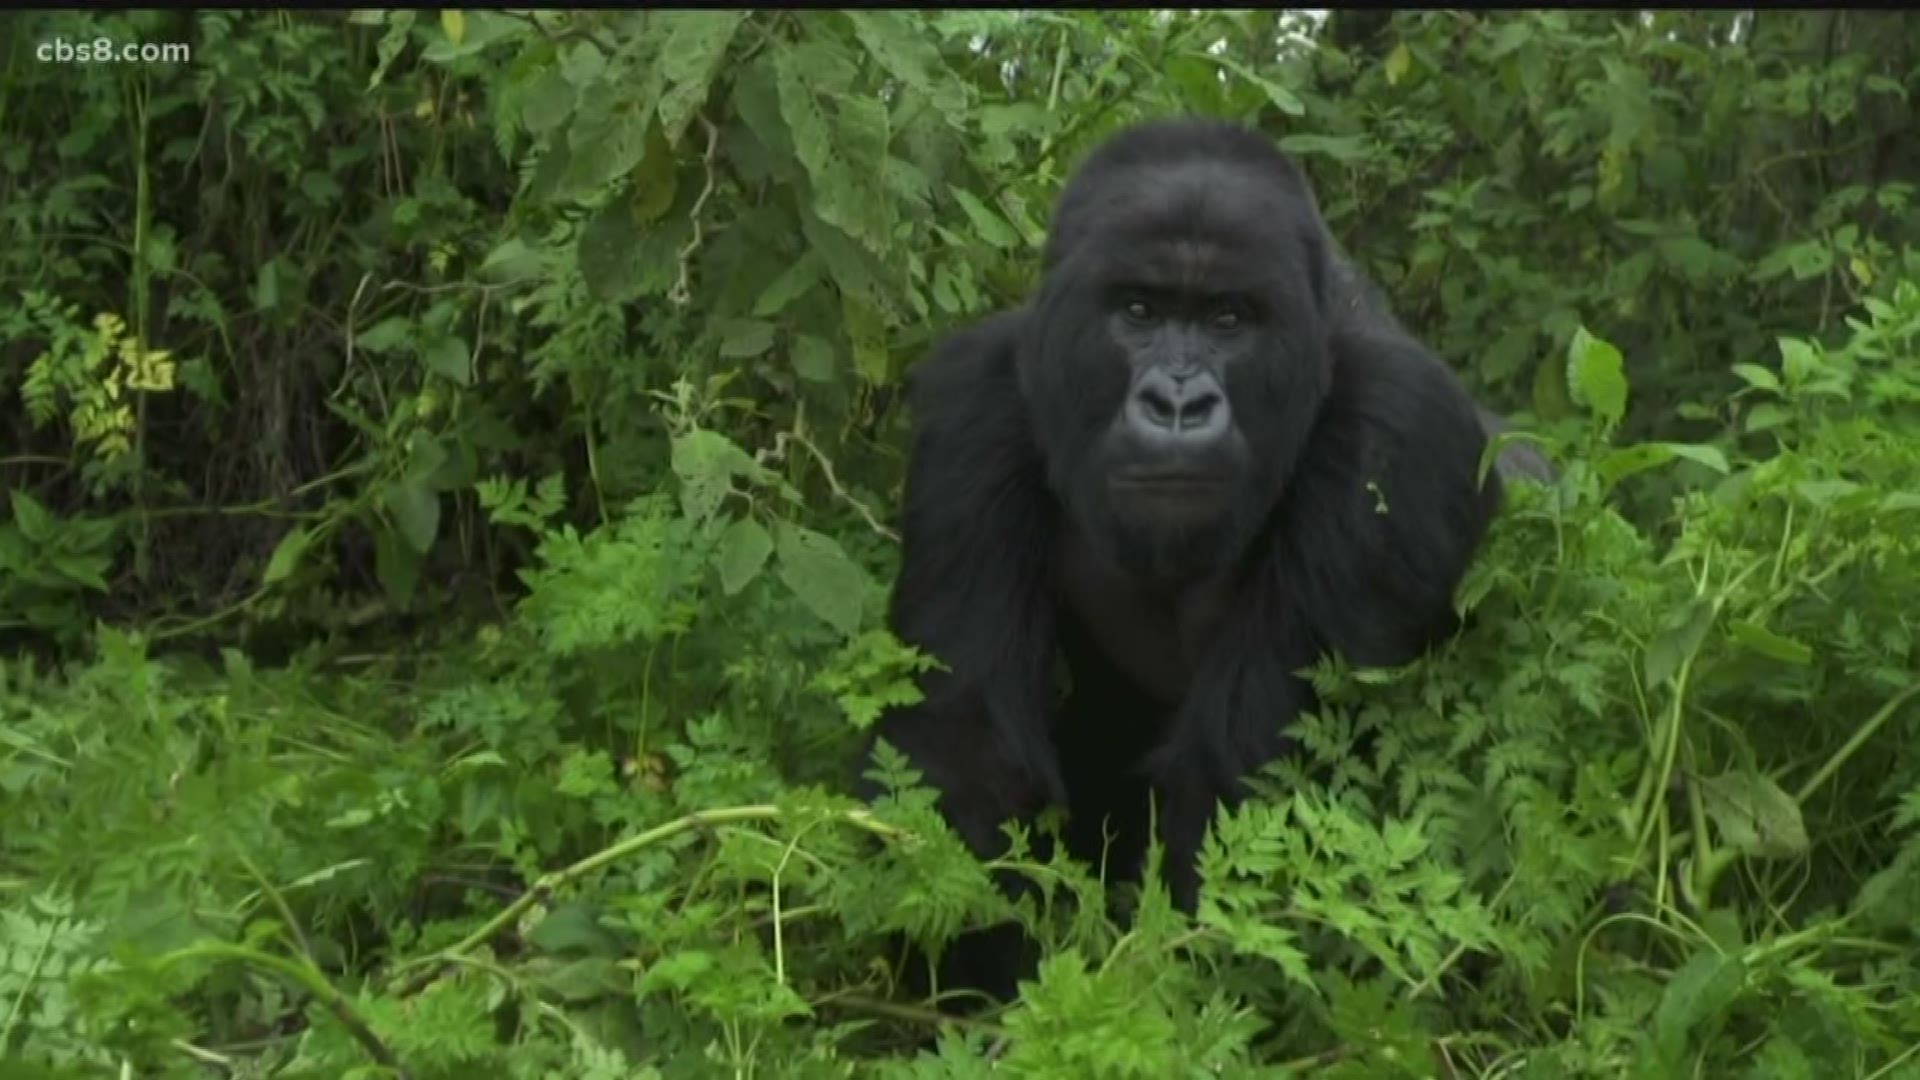 If you want to see the park where these gorillas live, it'll cost you $1,500 per person.